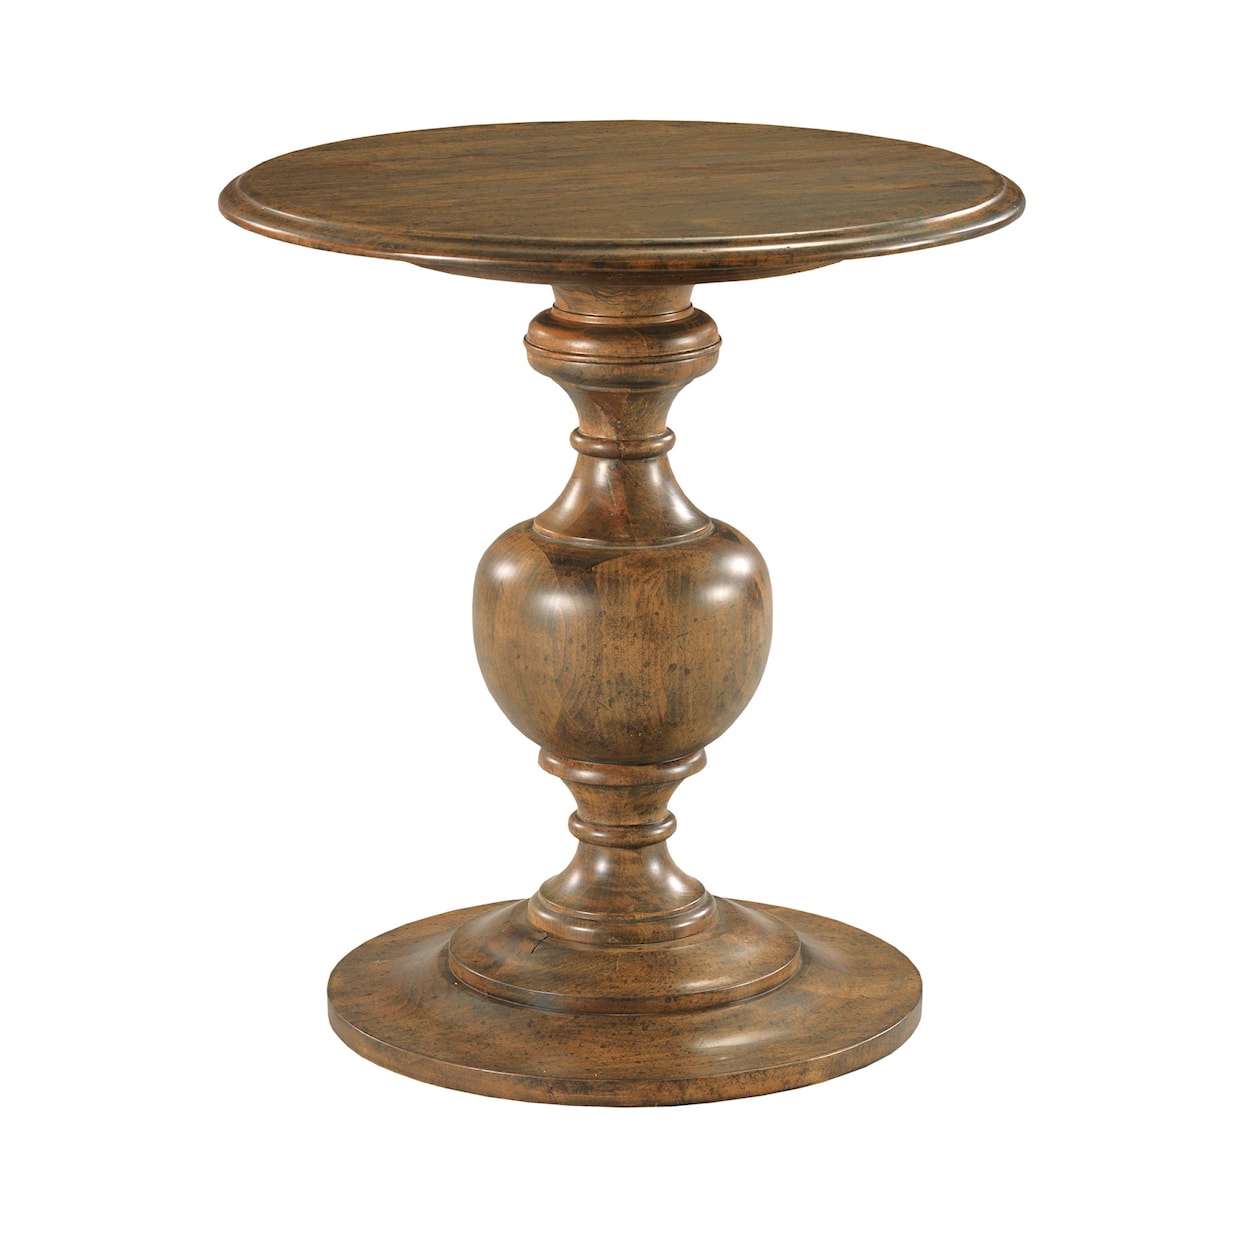 Kincaid Furniture Ansley Barden Round End Table